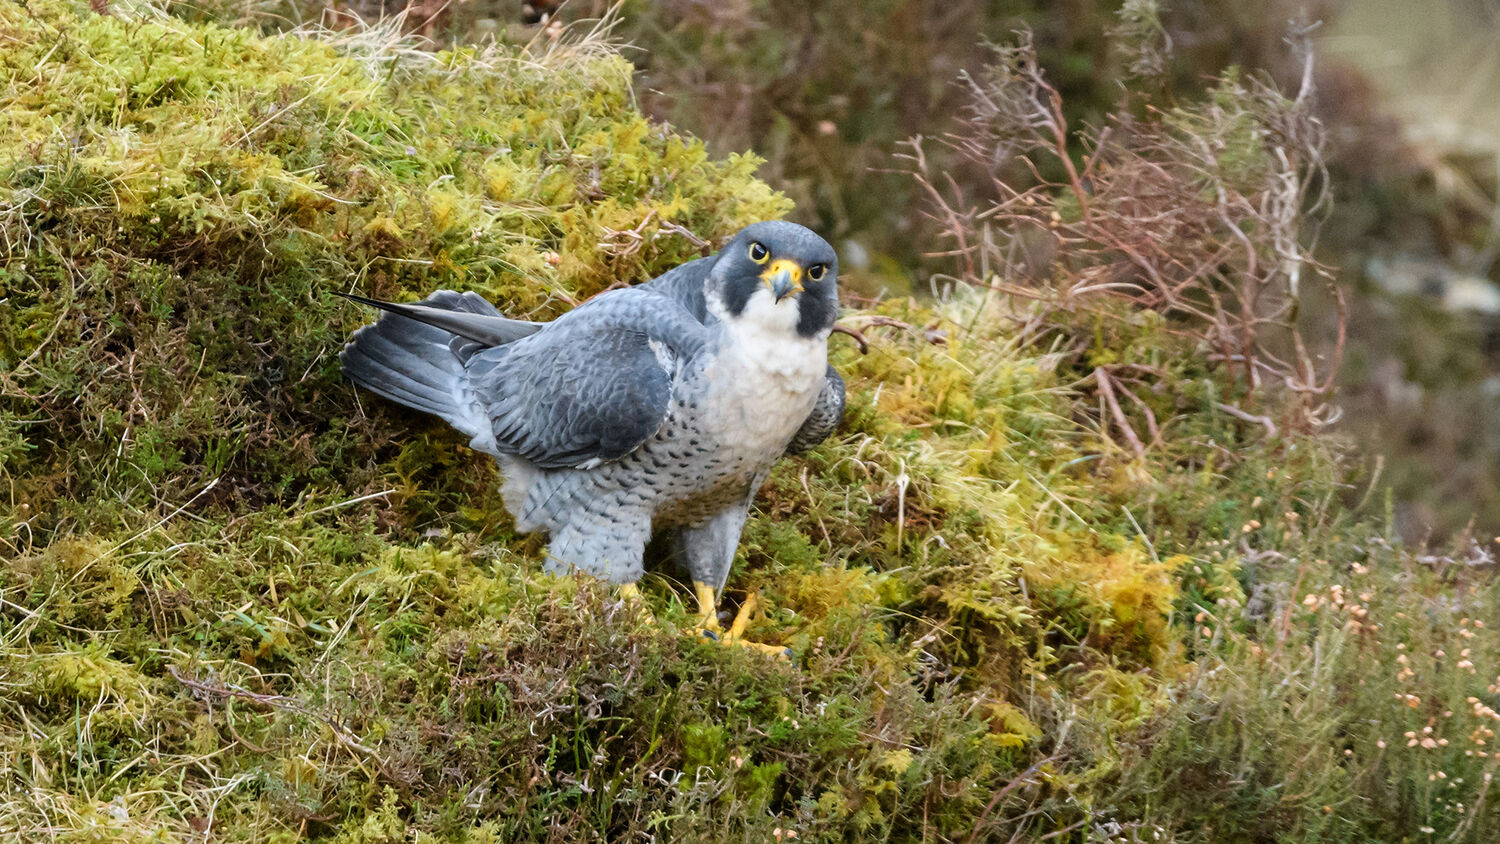 A peregrine falcon stands on a mossy ledge at Grey Mare’s Tail, looking directly at the camera. It has a hooked beak with a sharp point, and large yellow feet with sharp talons.